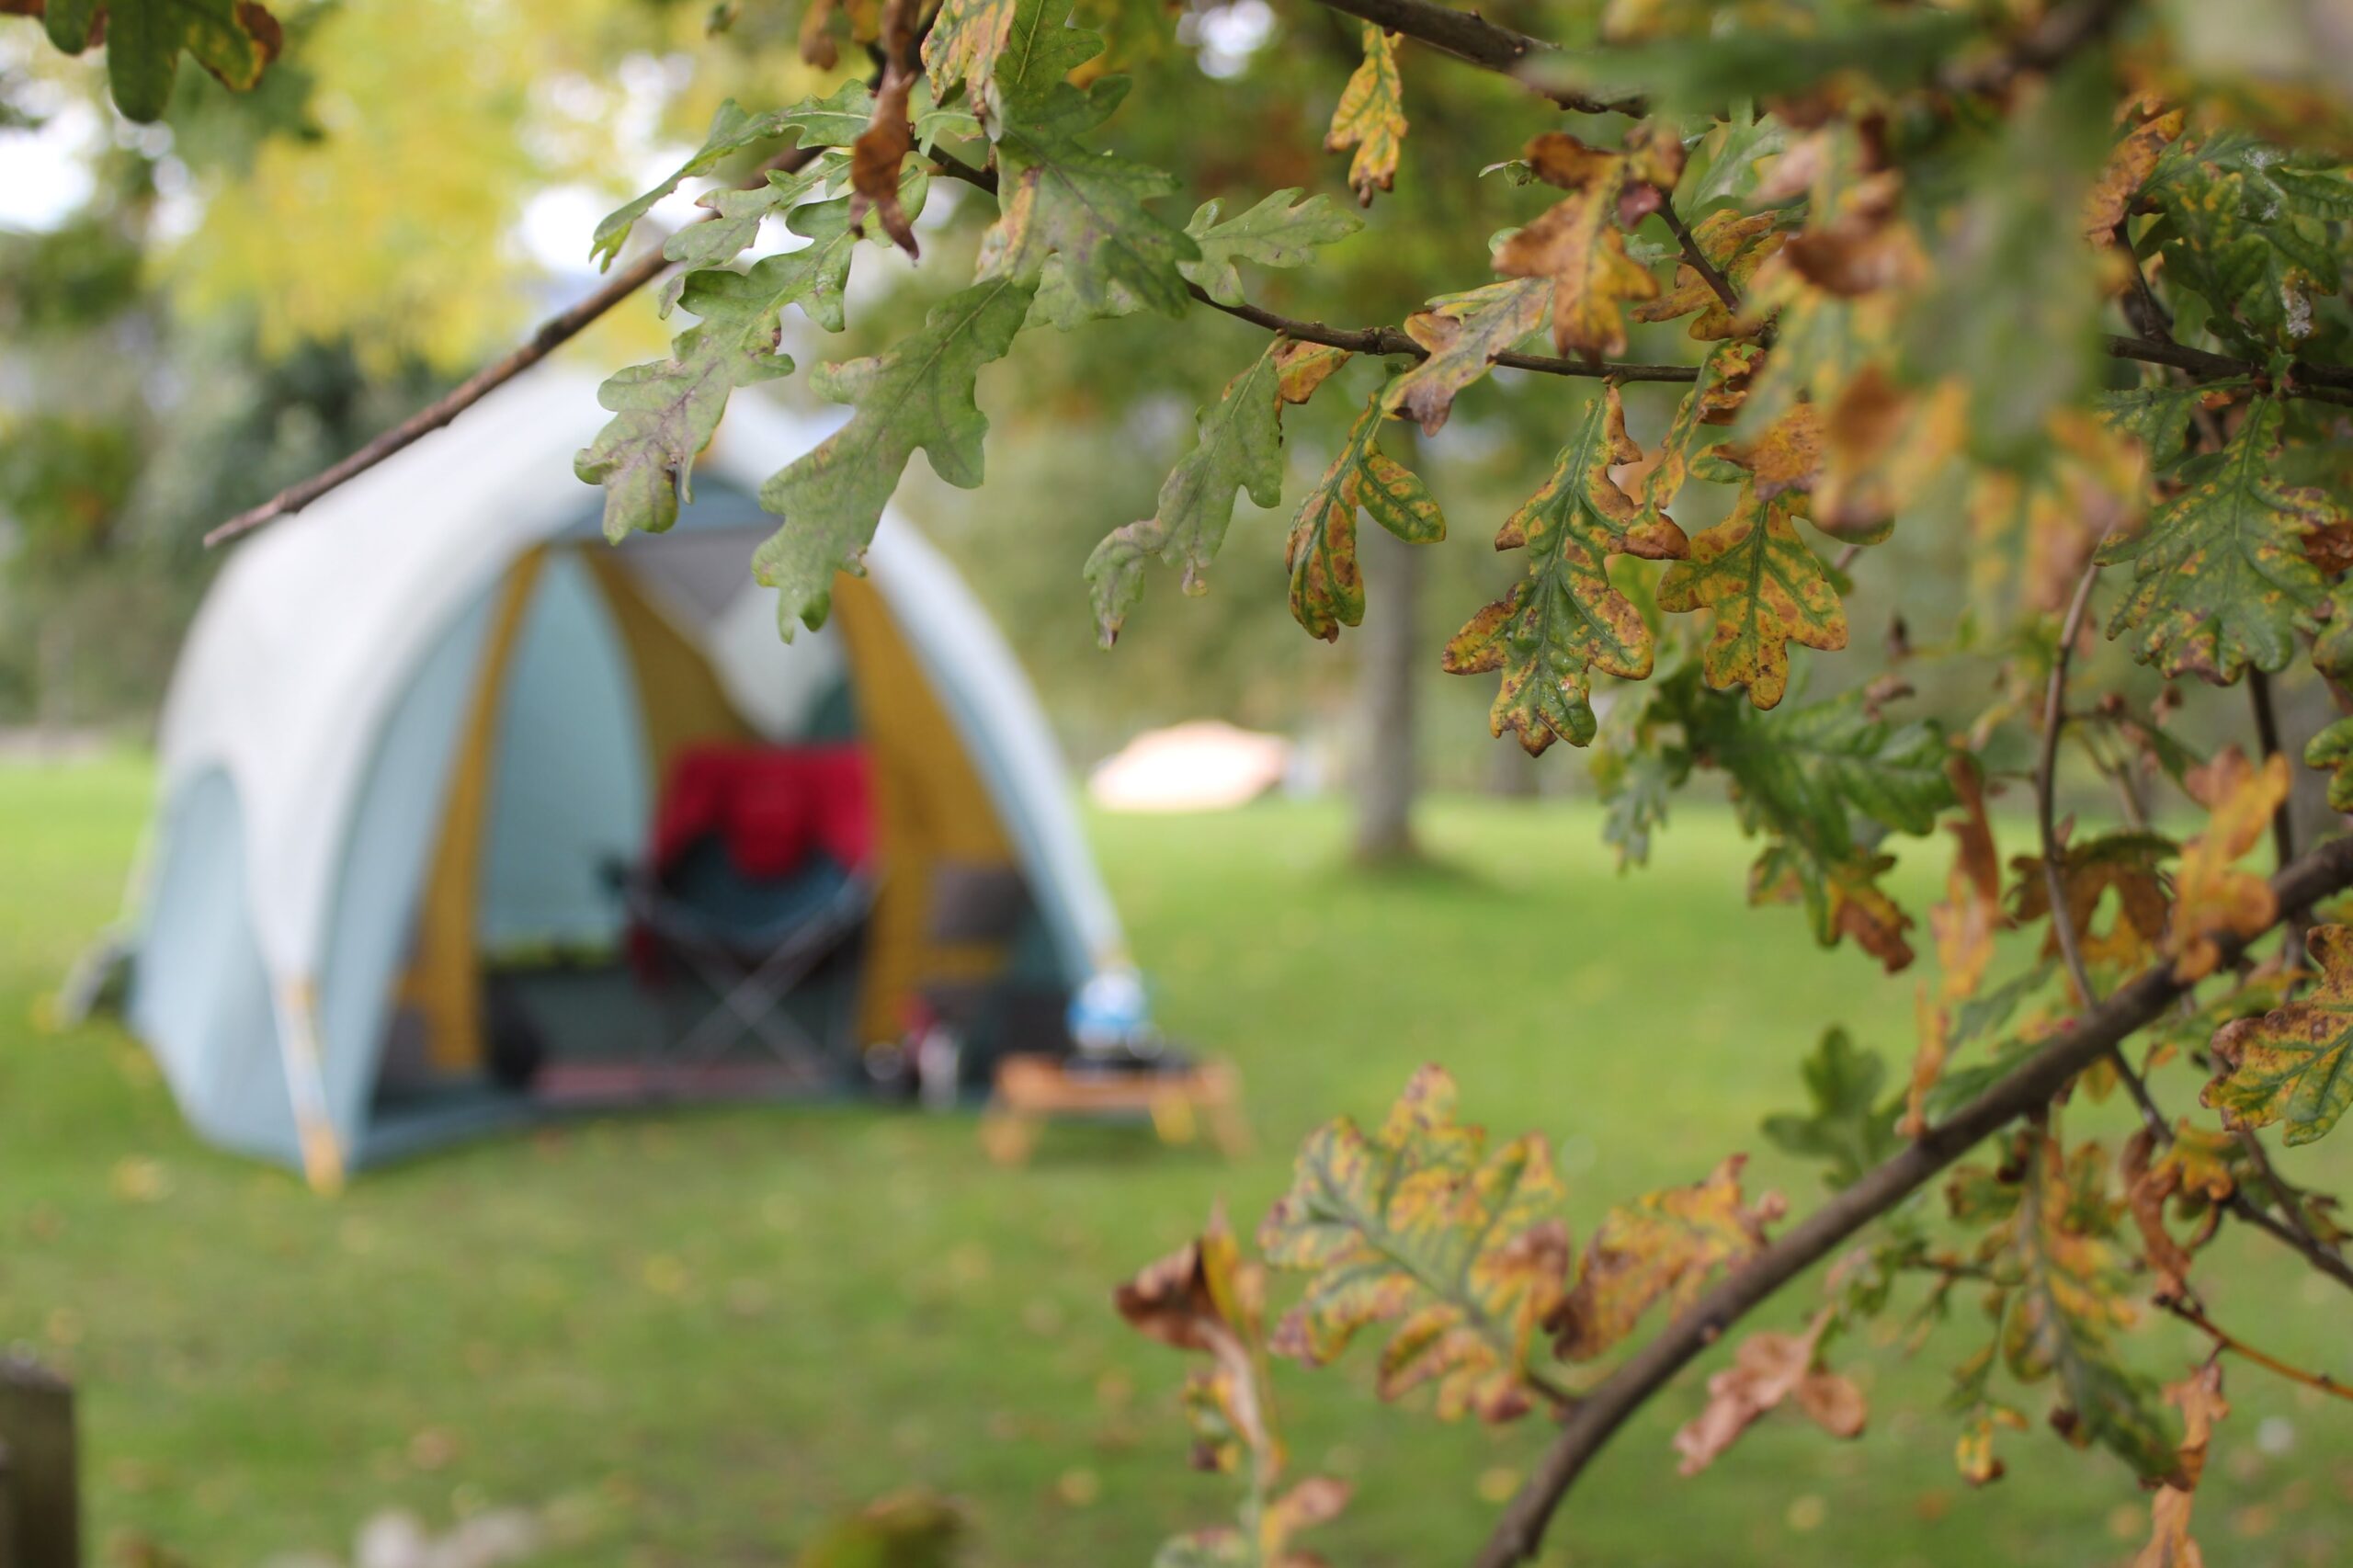 Camping in Wales: A blurred tent in the background. Photo by Shell CampingwithStyle on Unsplash